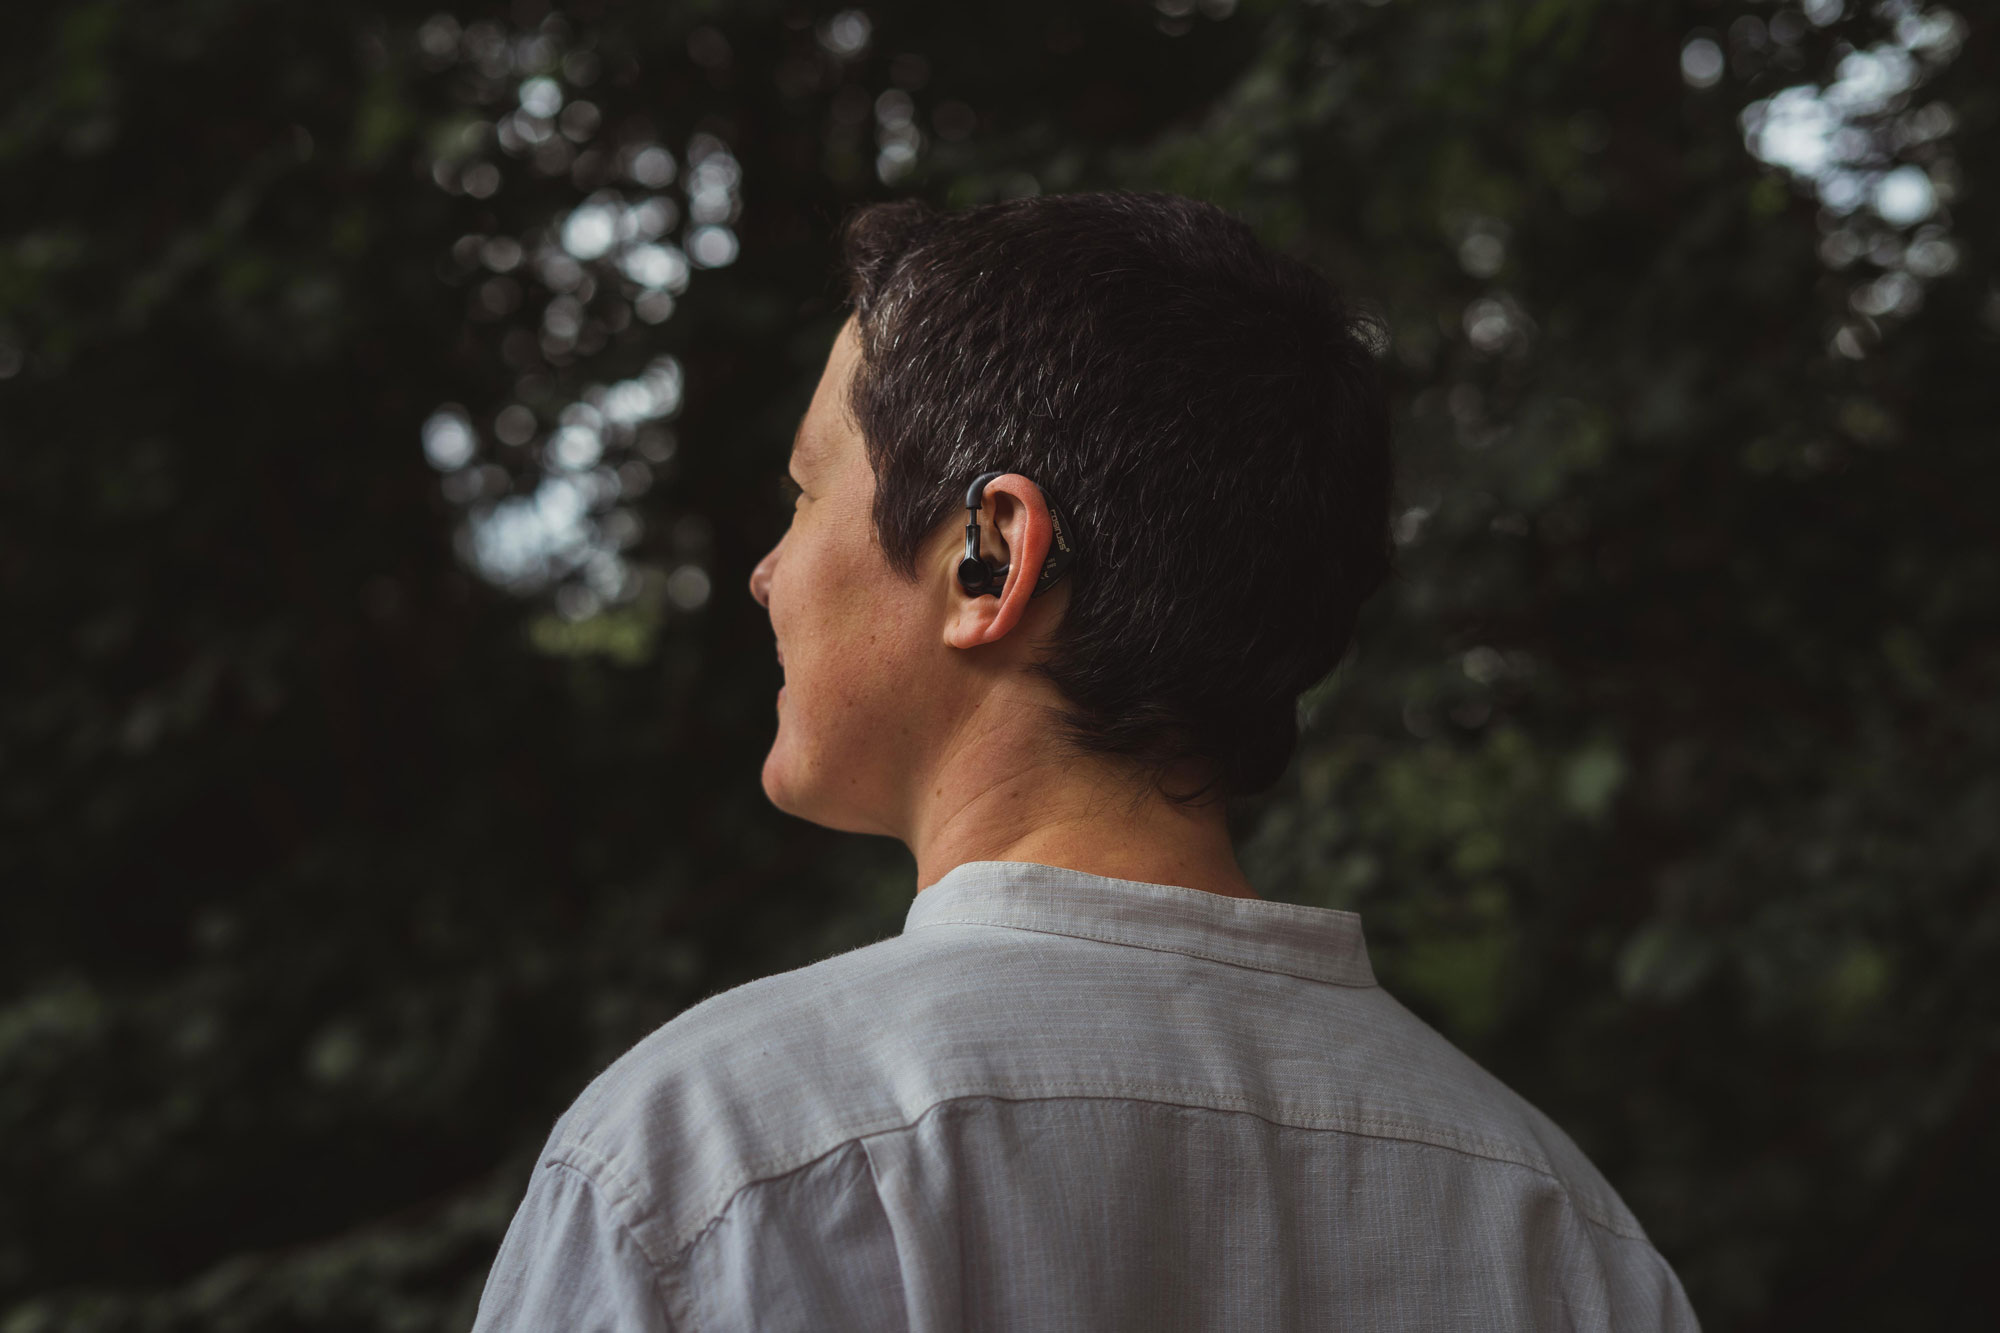 The in-ear sensor produced by Cosinuss GmbH can be fitted in the ear like sport headphones, continuously measures various vital signs and is being augmented in the framework of the »MOND« project with the EEG recording components.